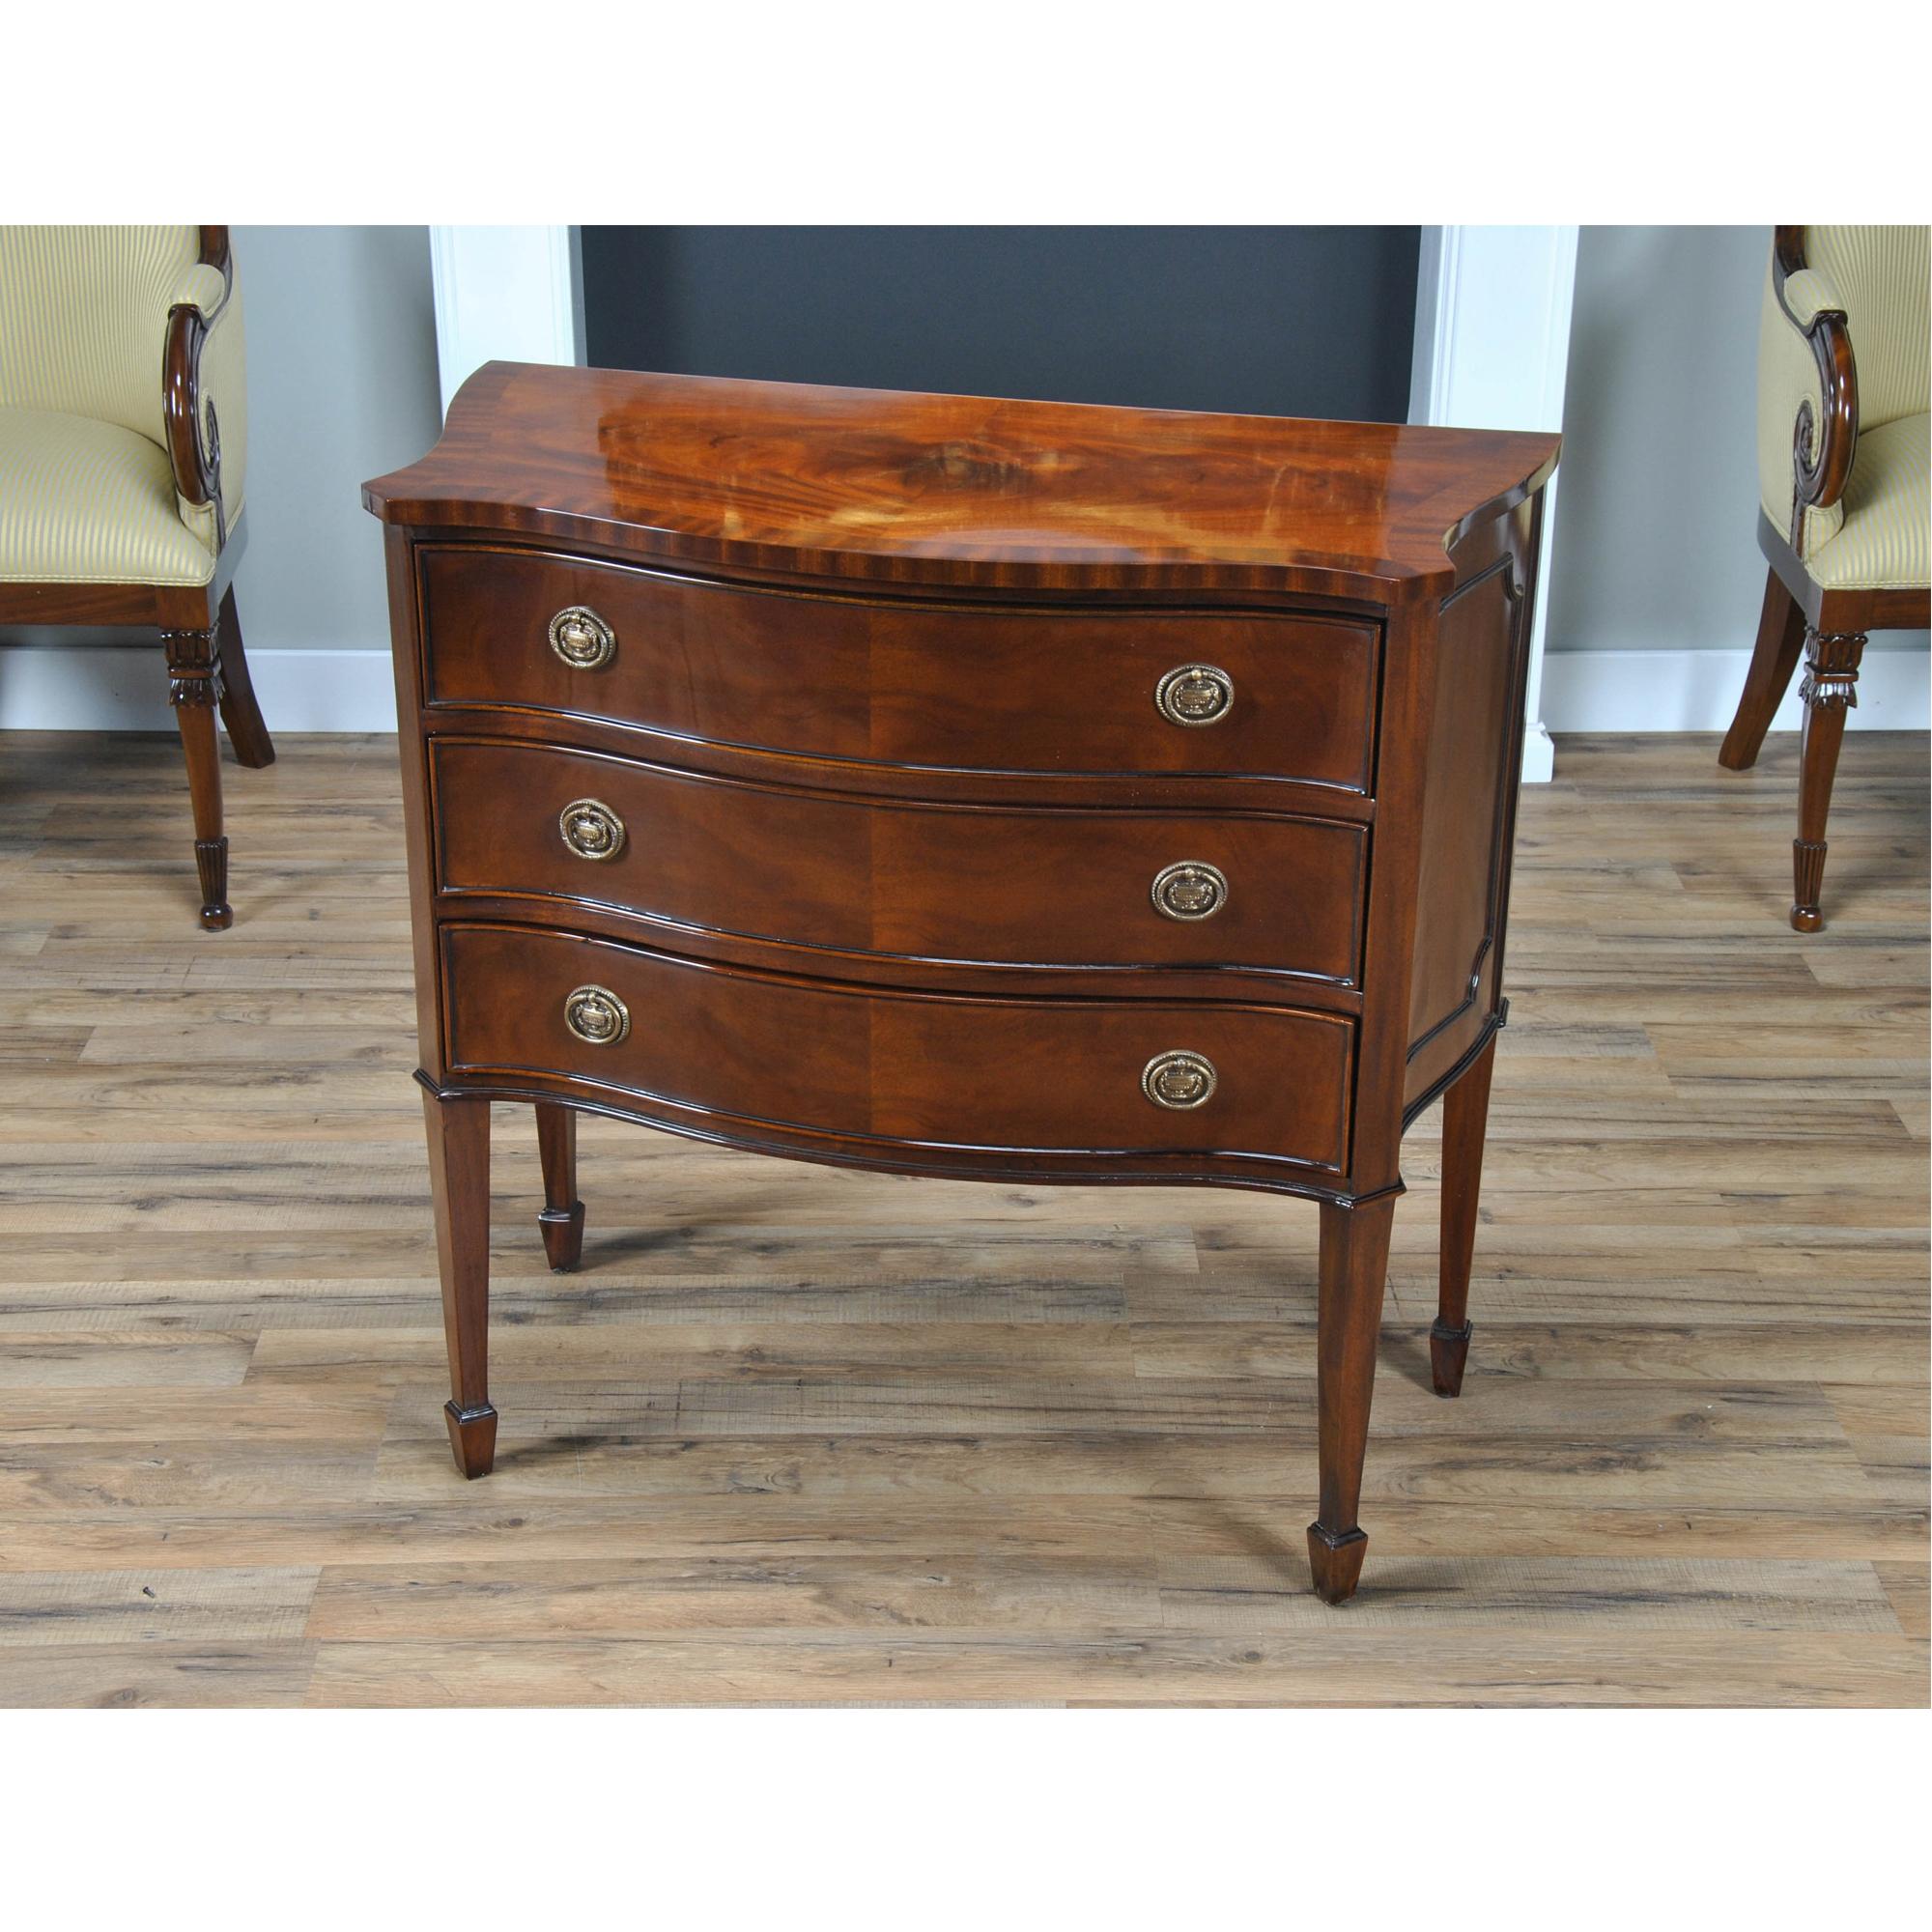 An excellent quality Mahogany Hepplewhite Chest with serpentine shaped front, dovetailed drawers and solid brass handles. Produced with fine grain mahogany solids and great quality veneers our Mahogany Hepplewhite Chest is both decorative and